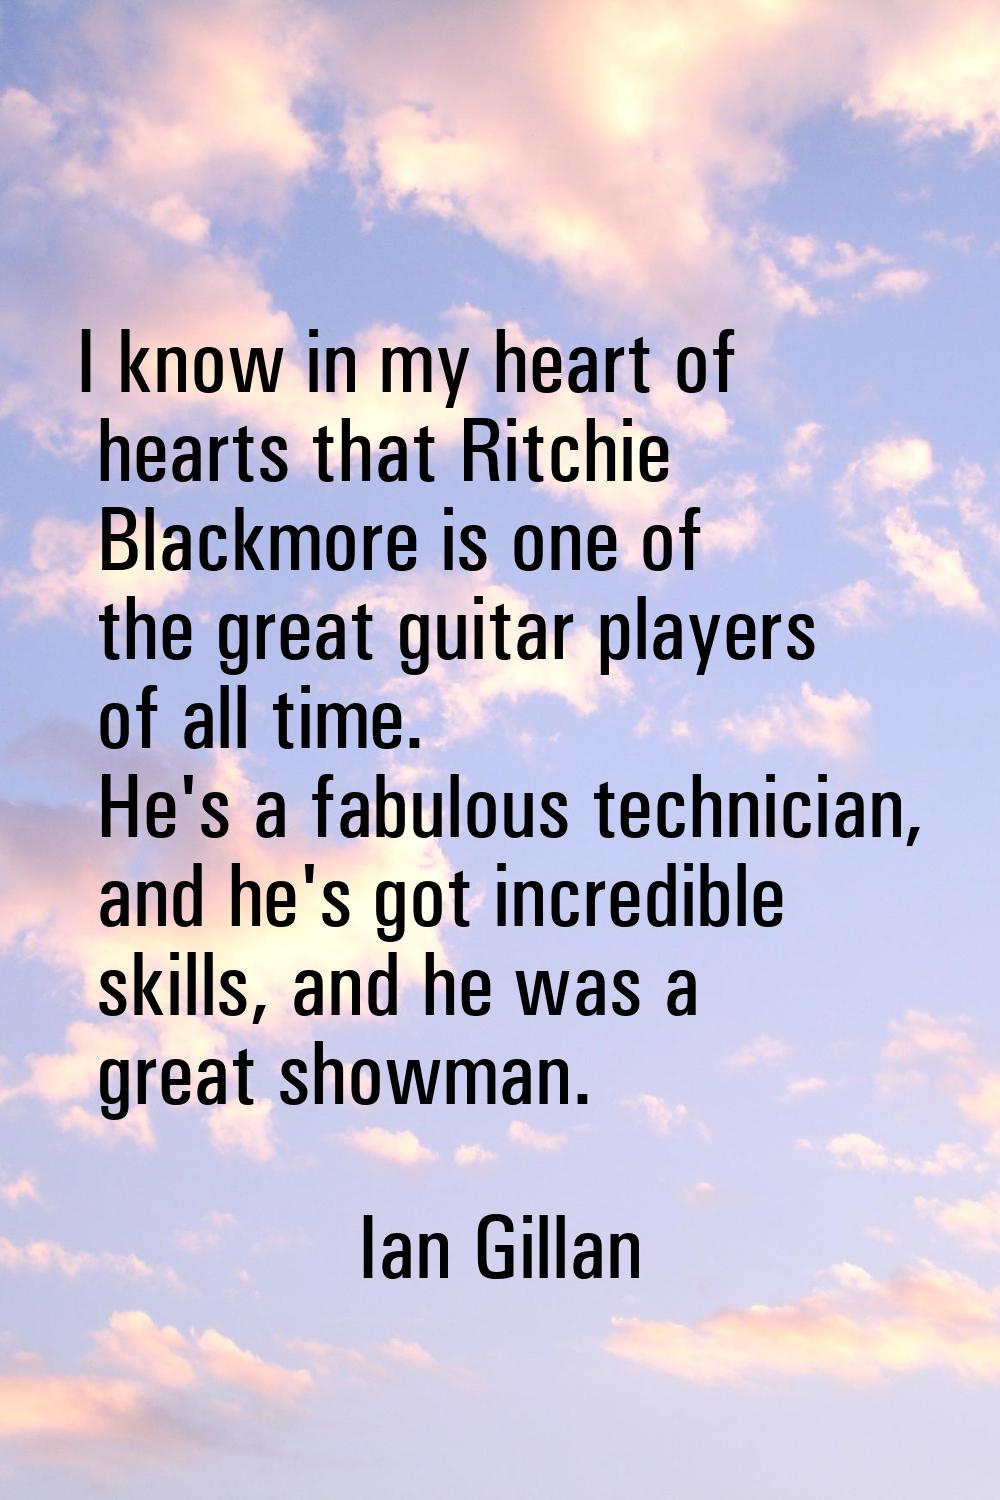 I know in my heart of hearts that Ritchie Blackmore is one of the great guitar players of all time.